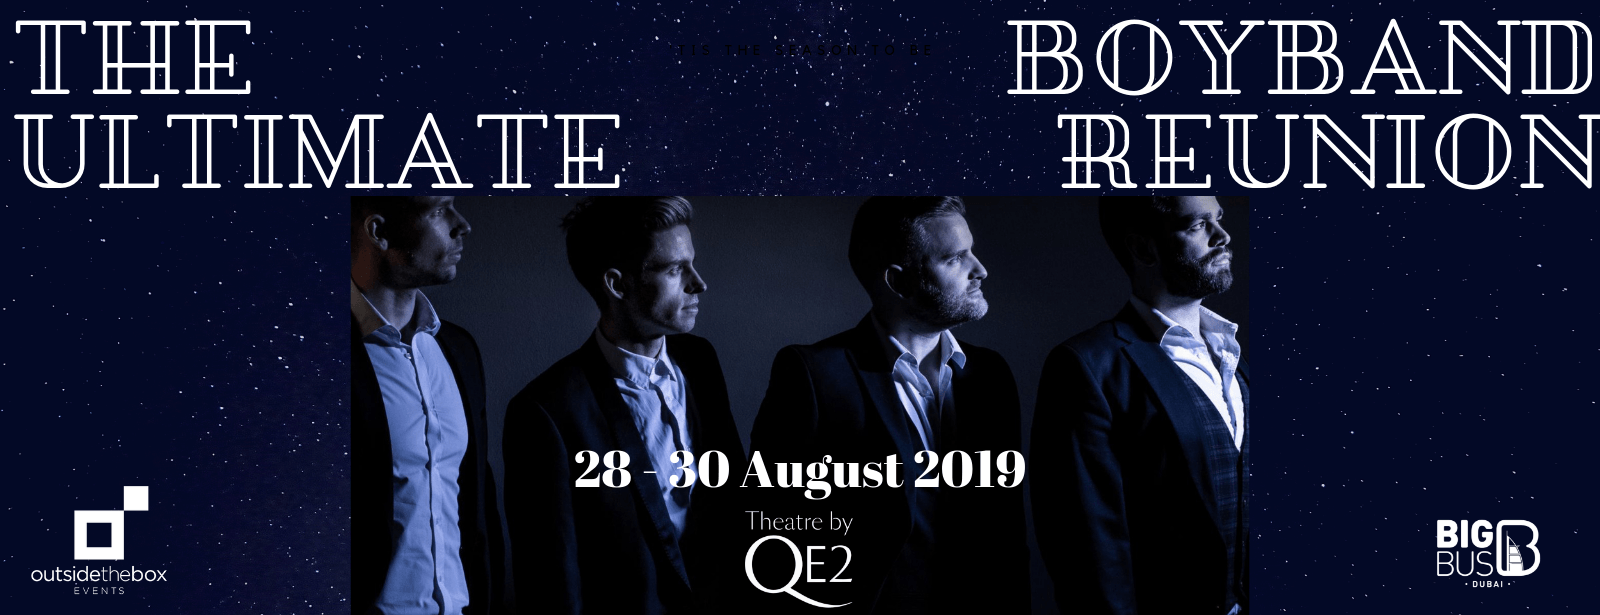 Theatre by QE2 -The Ultimate Boyband Reunion - Coming Soon in UAE